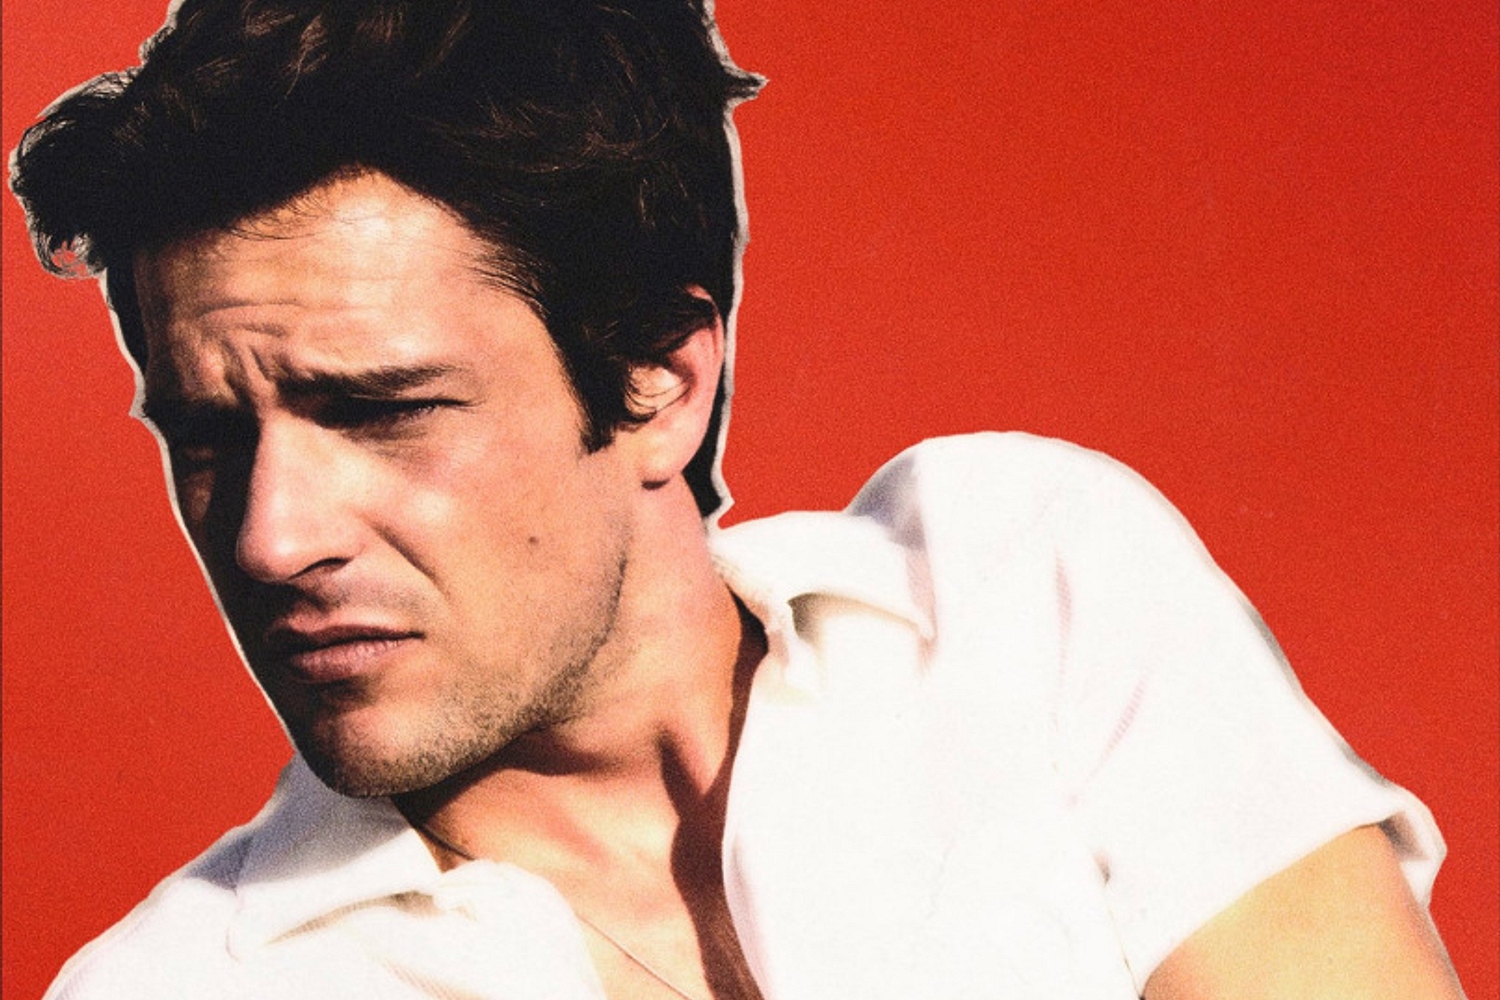 Brandon Flowers previews ‘Still Want You’ track with new trailer